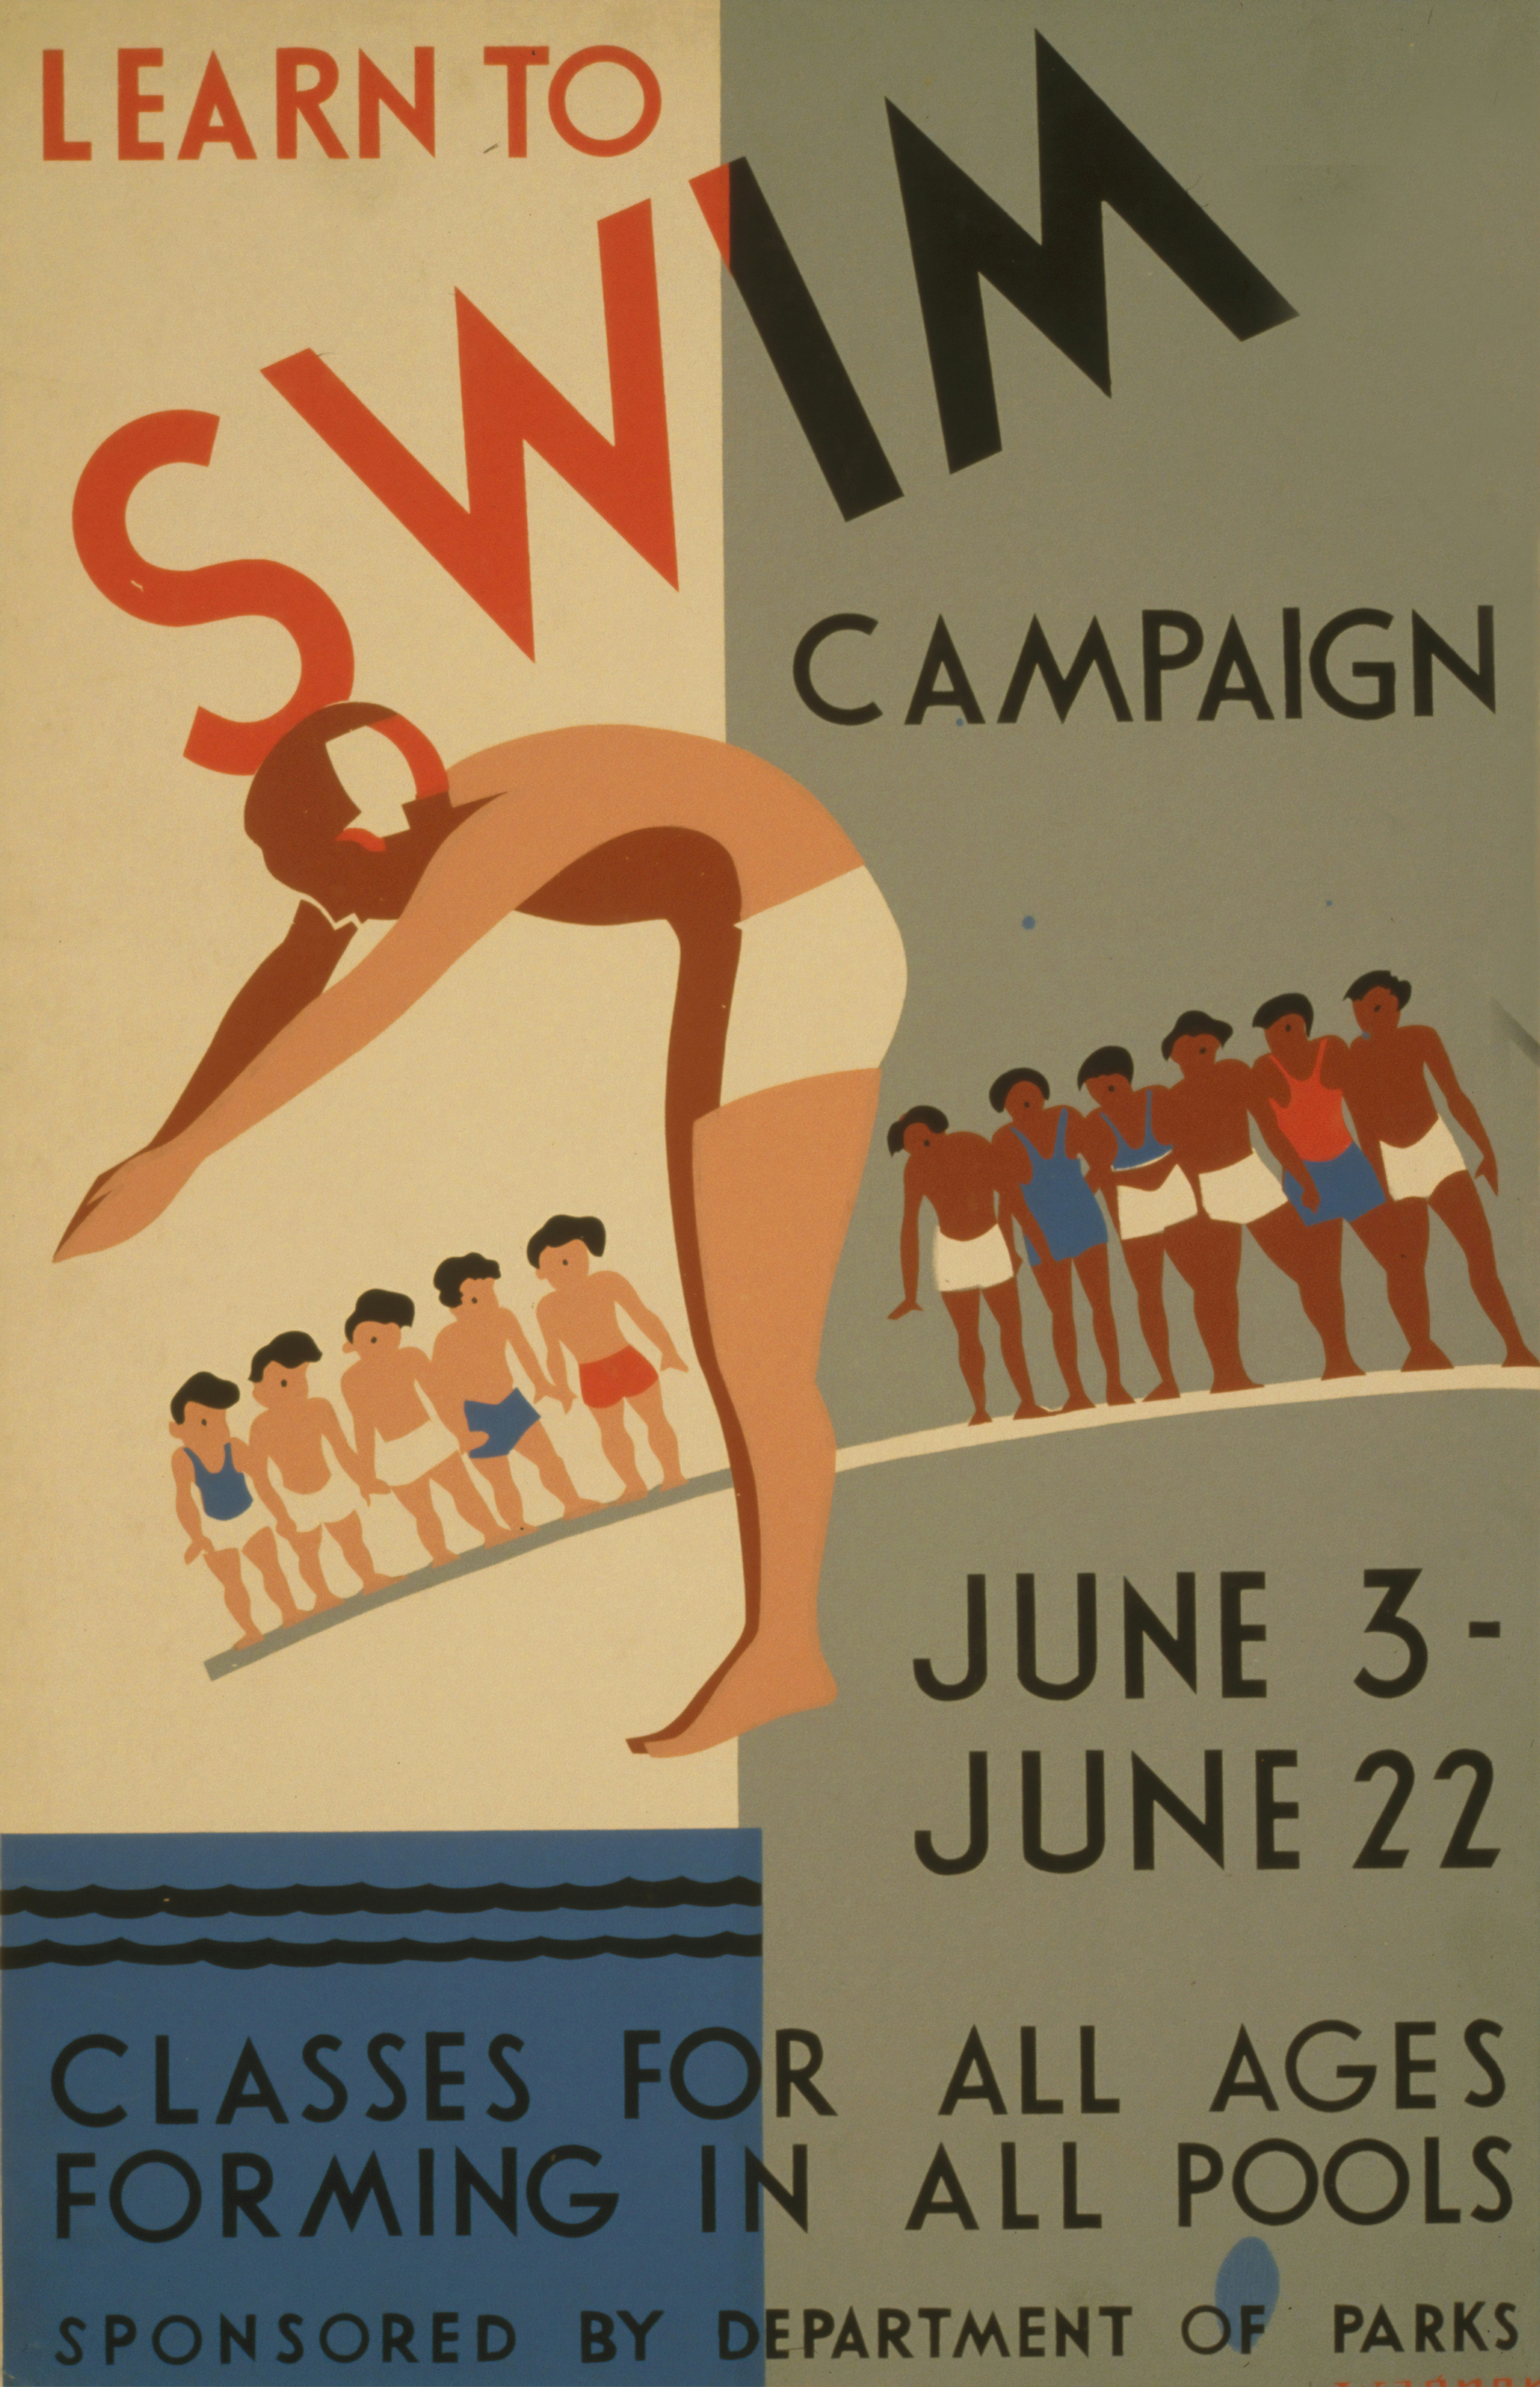 Learn to swim campaign. WPA poster.